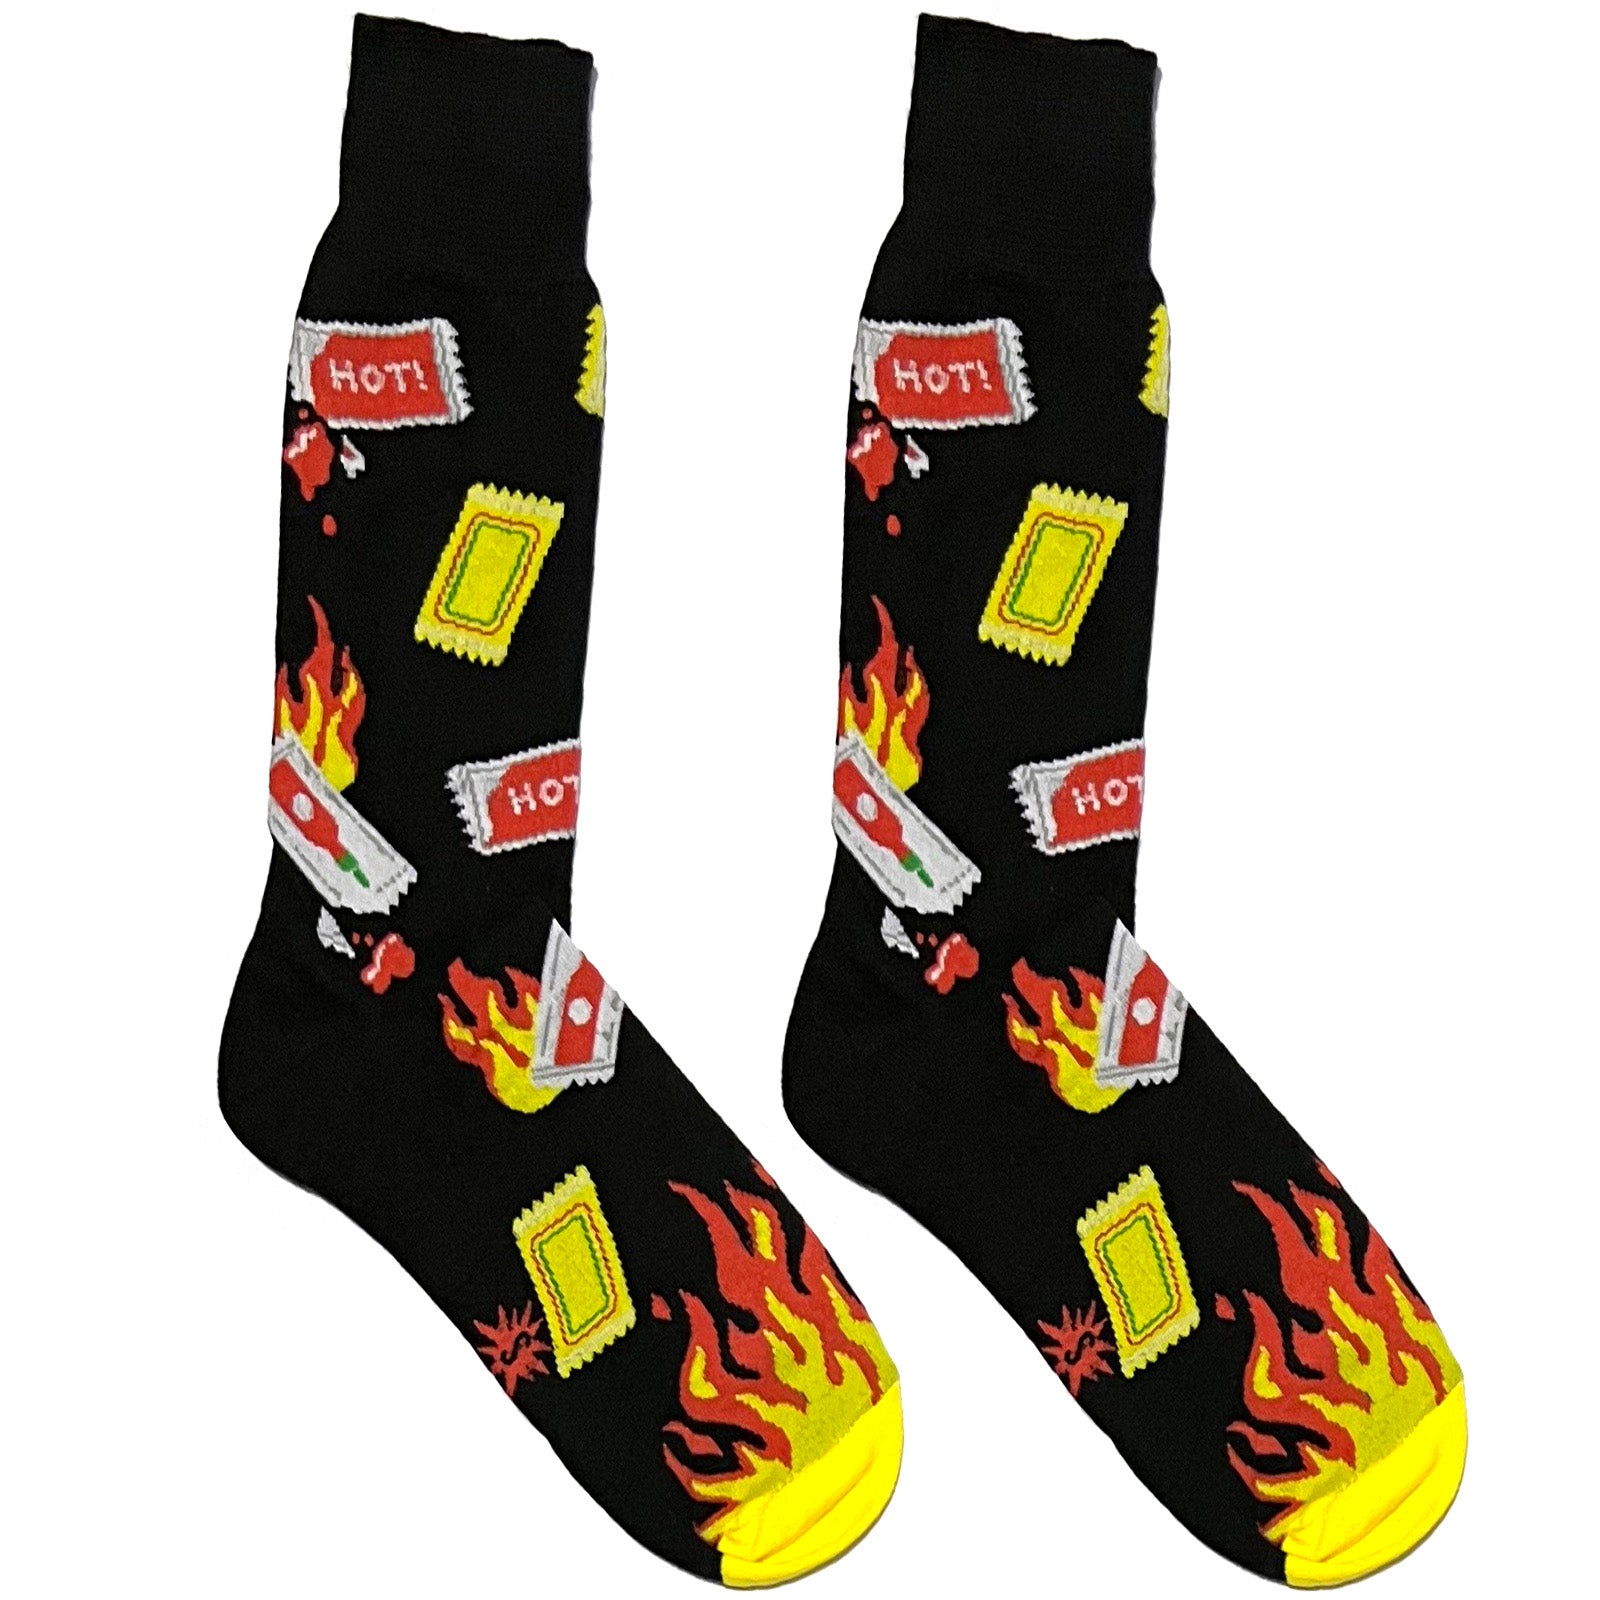 Black And Red Chilli Hot Socks